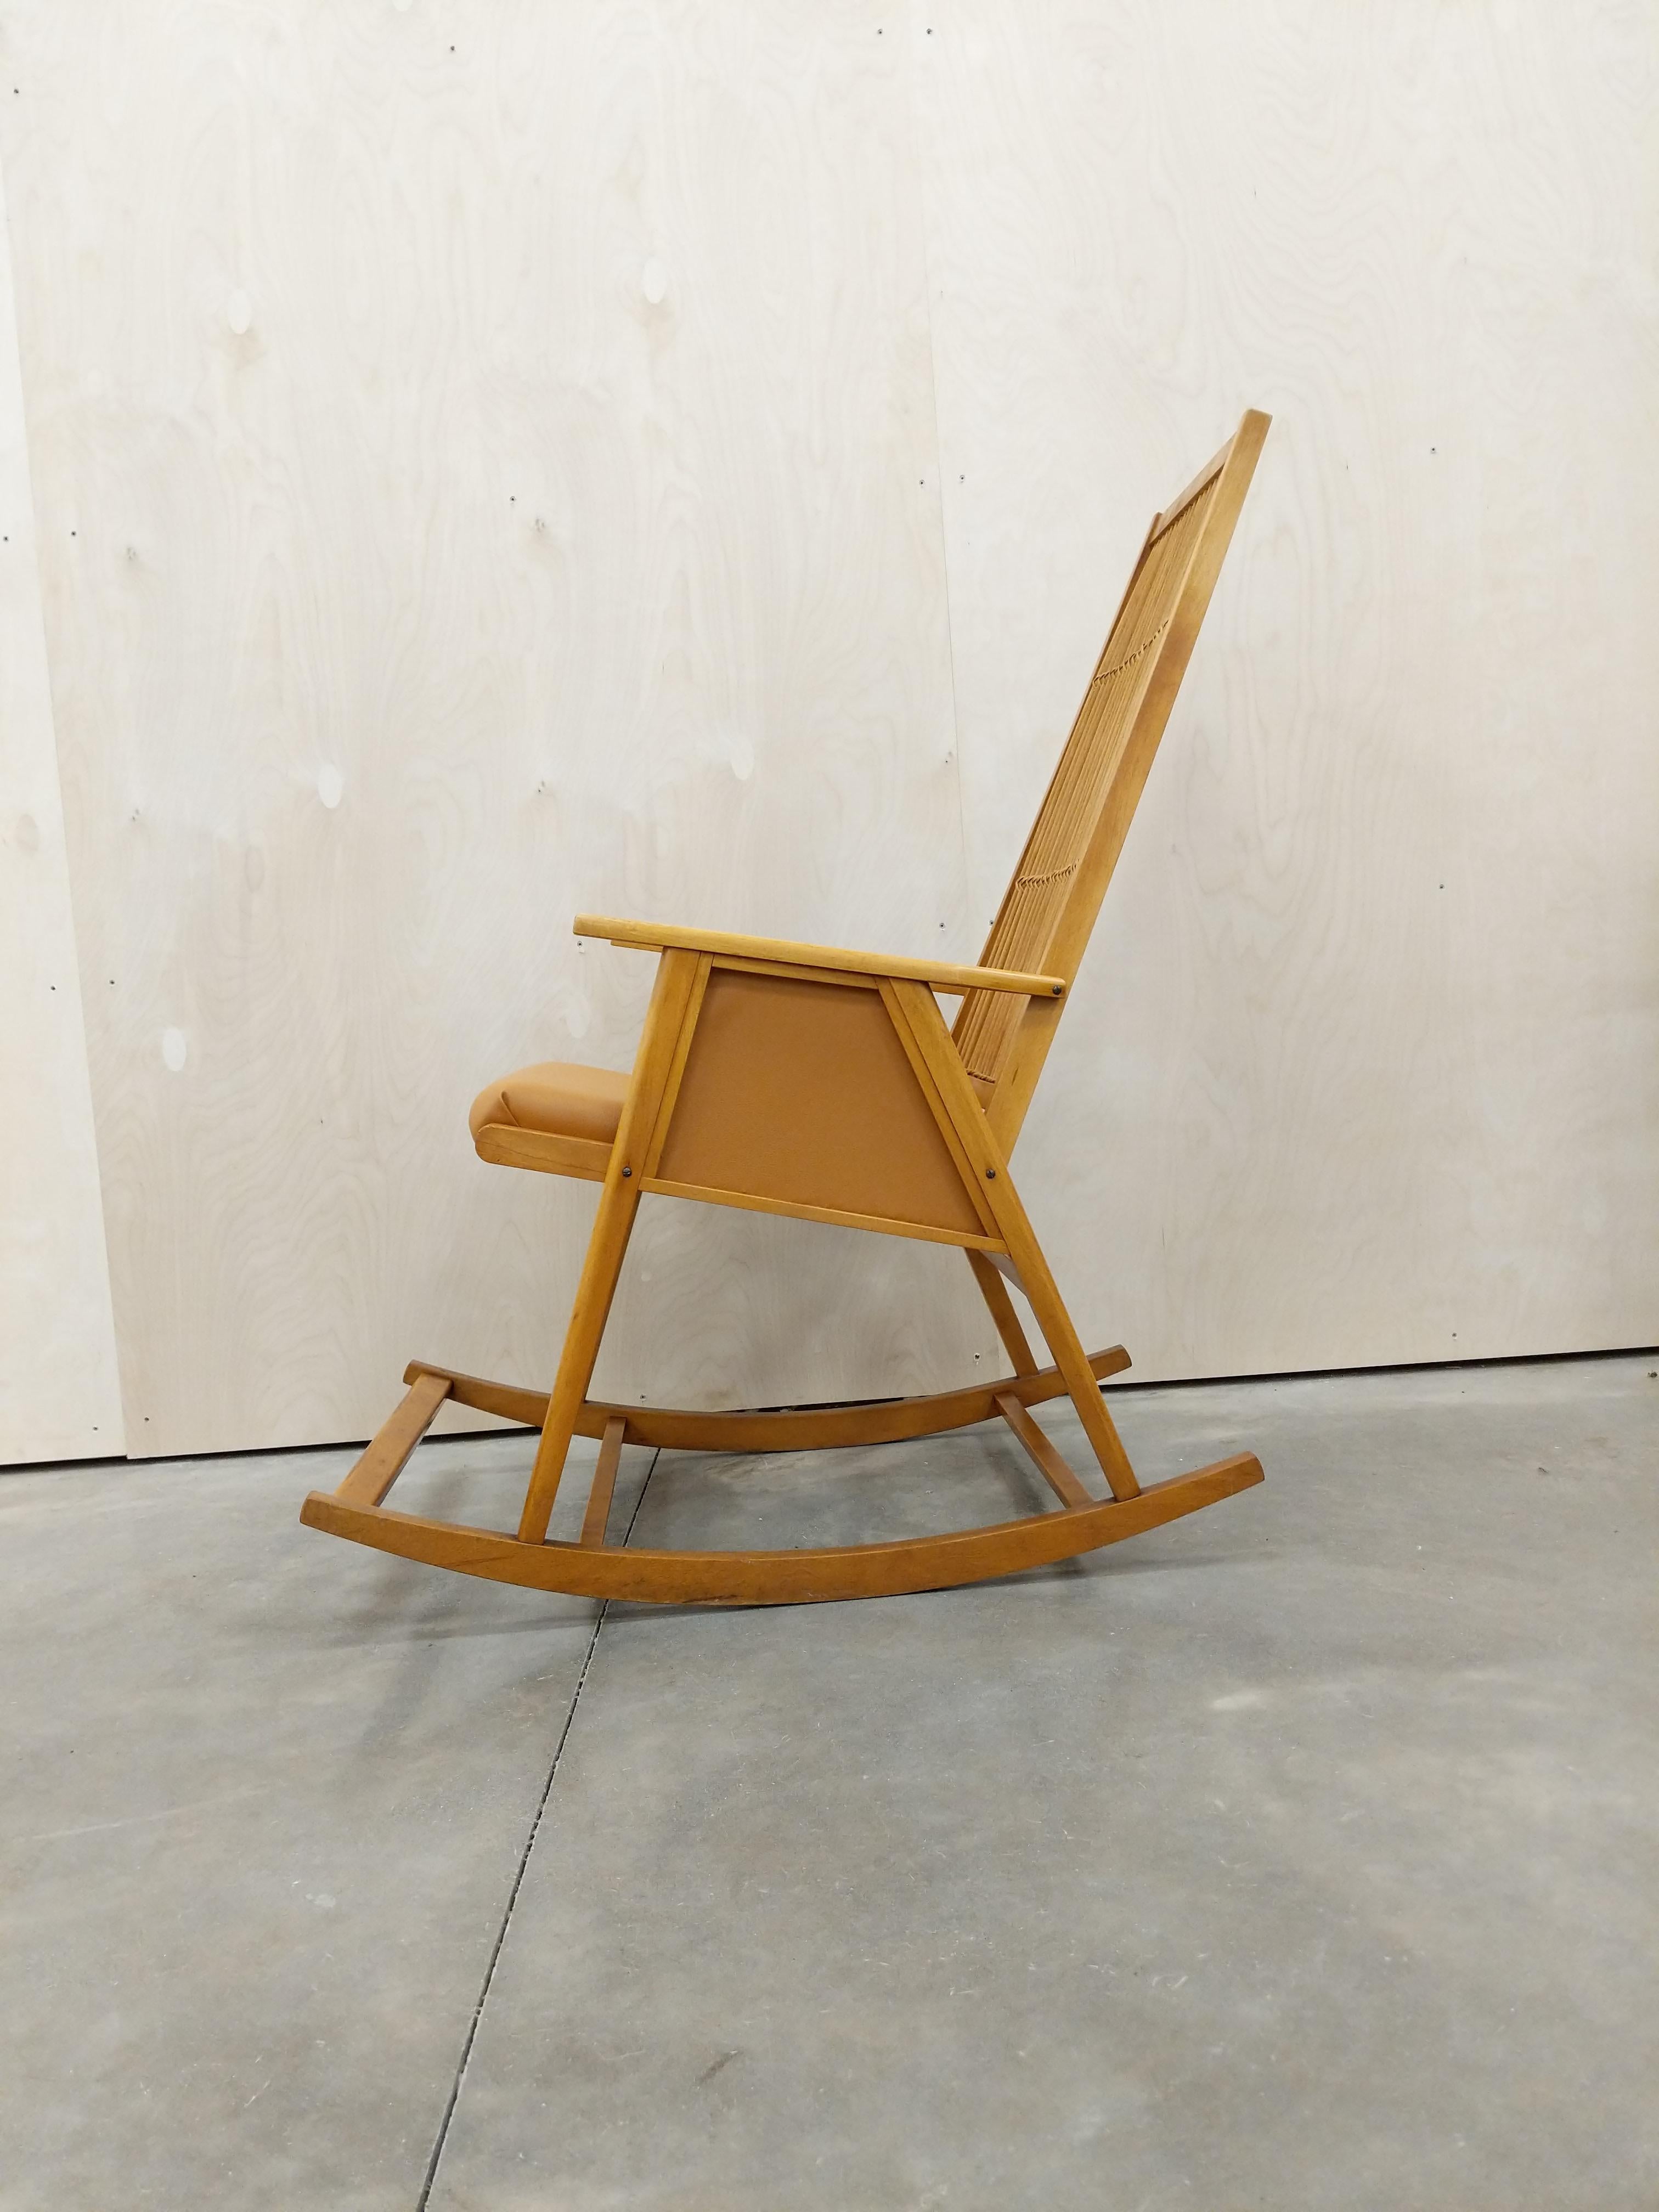 Authentic vintage Czech mid century modern rocking chair.

This chair is in excellent vintage condition with brand new Knoll upholstery!

We use Knoll 